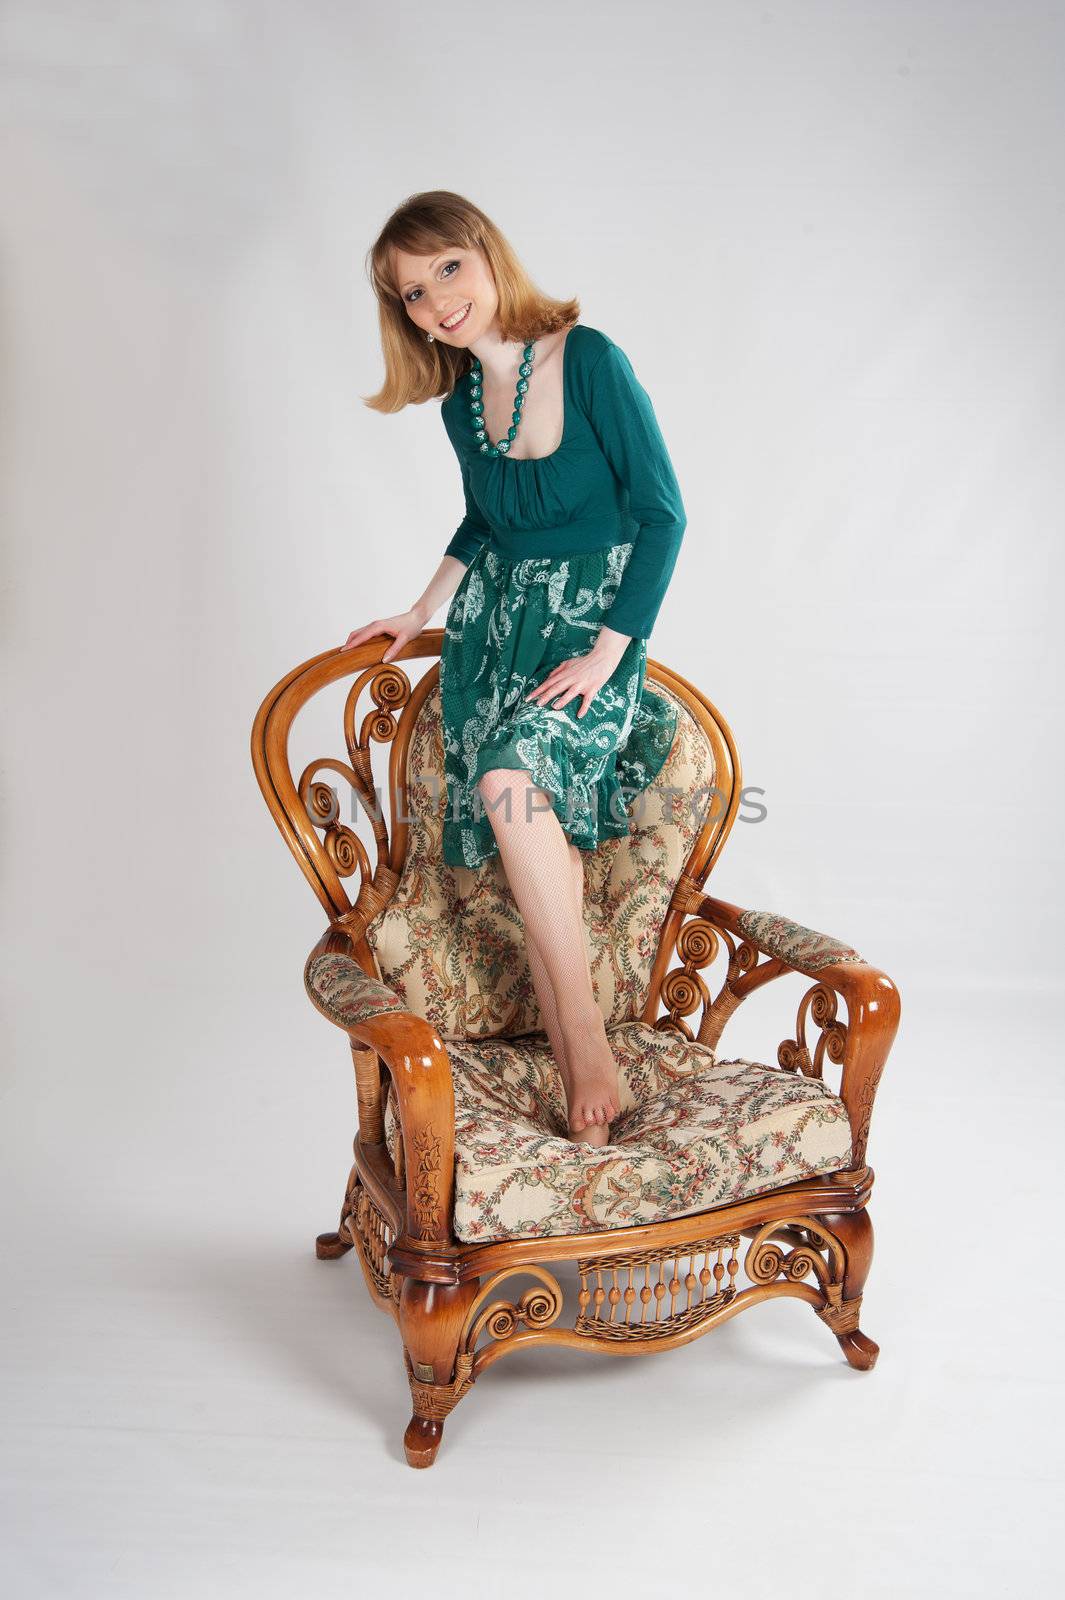 beautiful woman in a green dress sitting on a chair